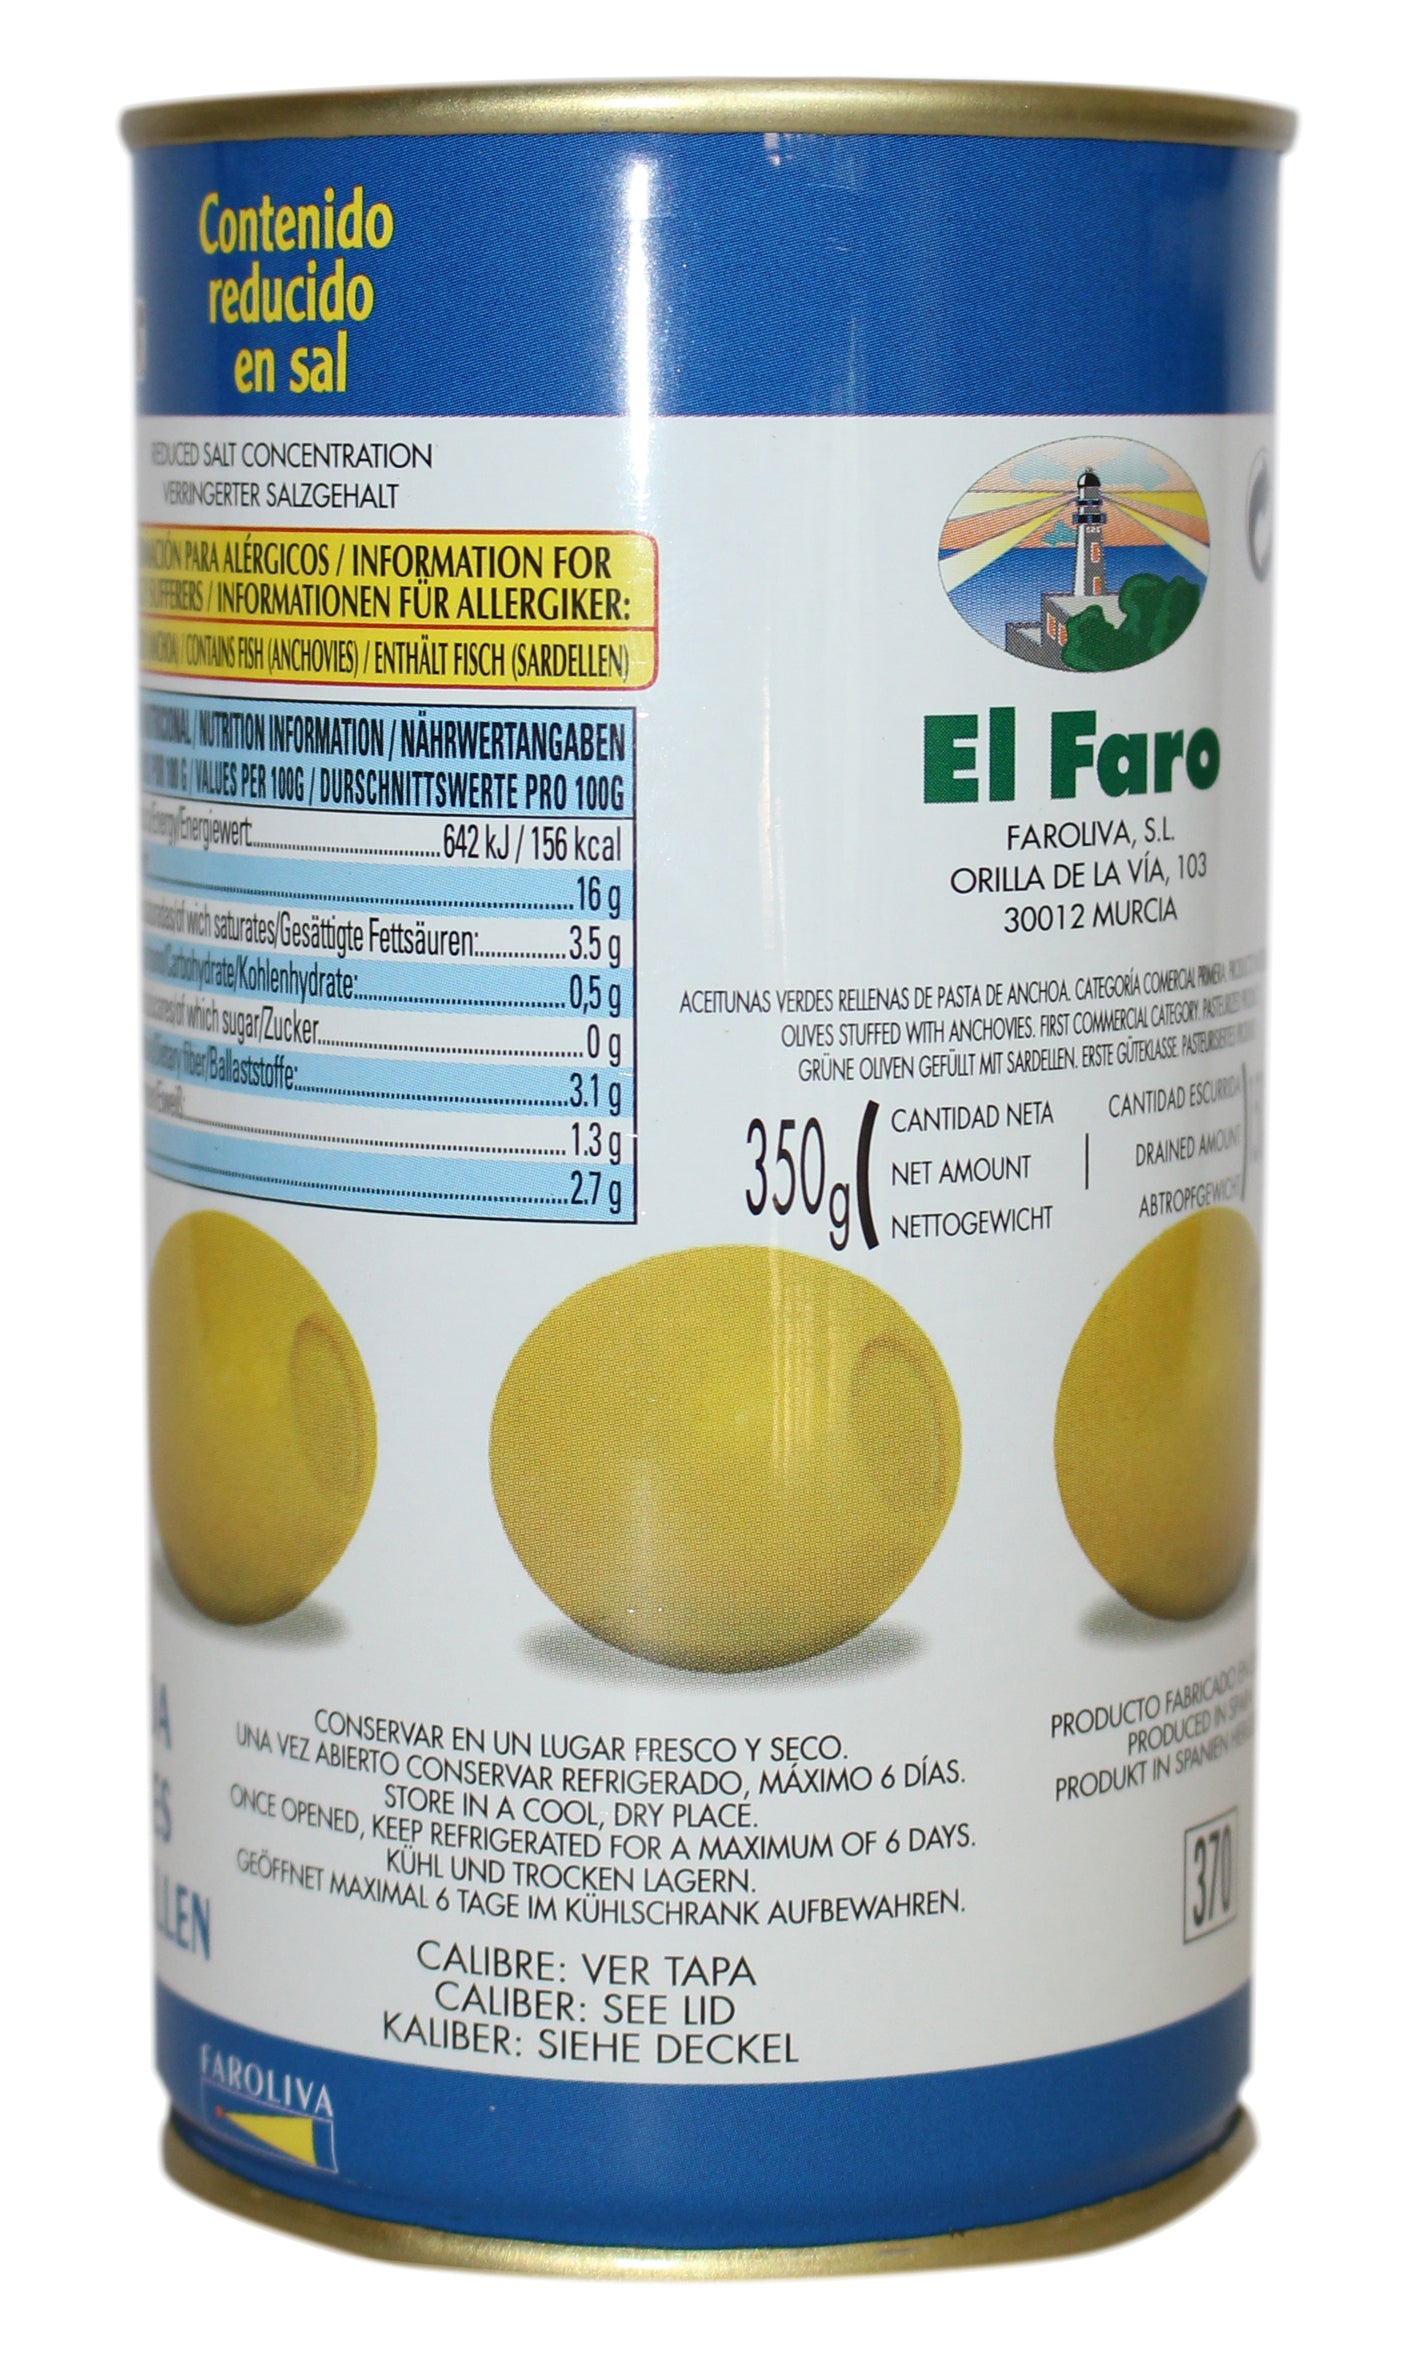 El Faro: Green Manzanilla Olives Filled With Anchovy - 350g